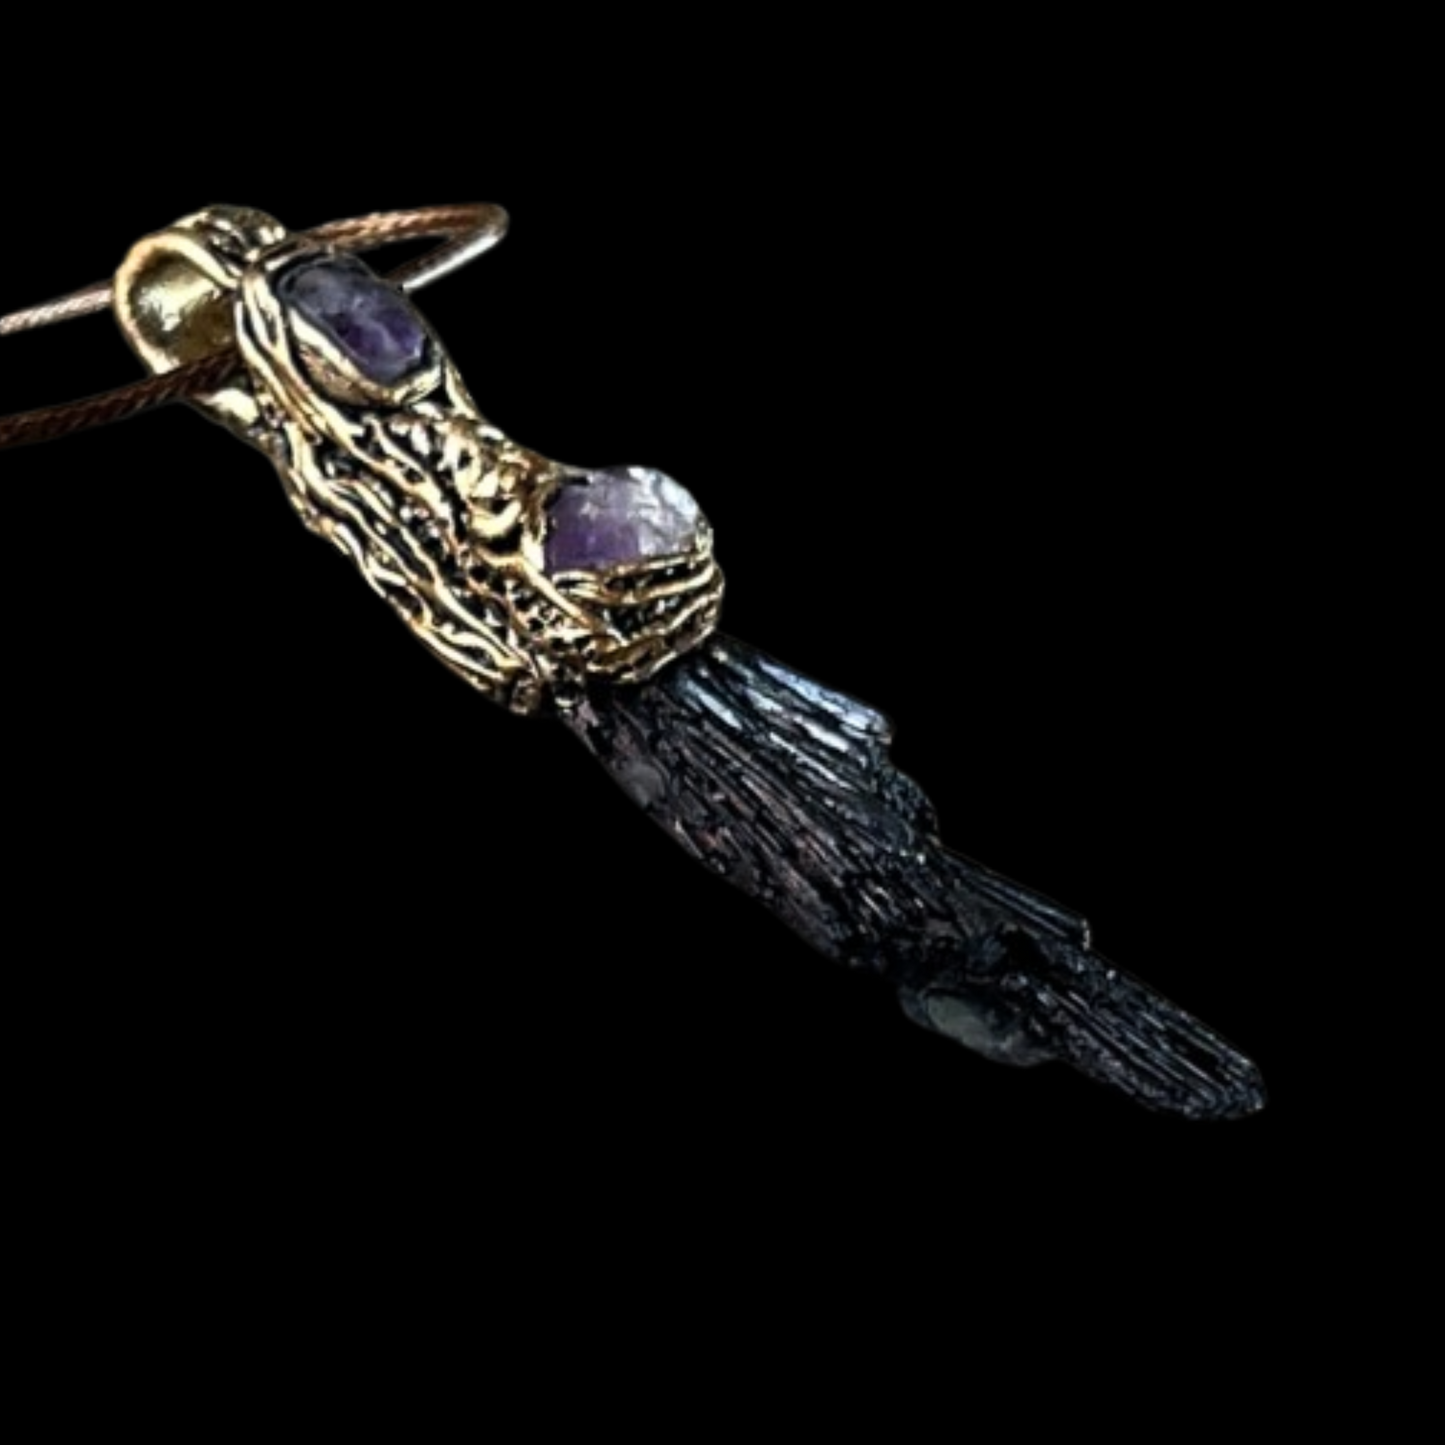 Raw Crystal Protection Amulet Pendant Necklace with Black Kyanite & Amethyst, spiritual gifts